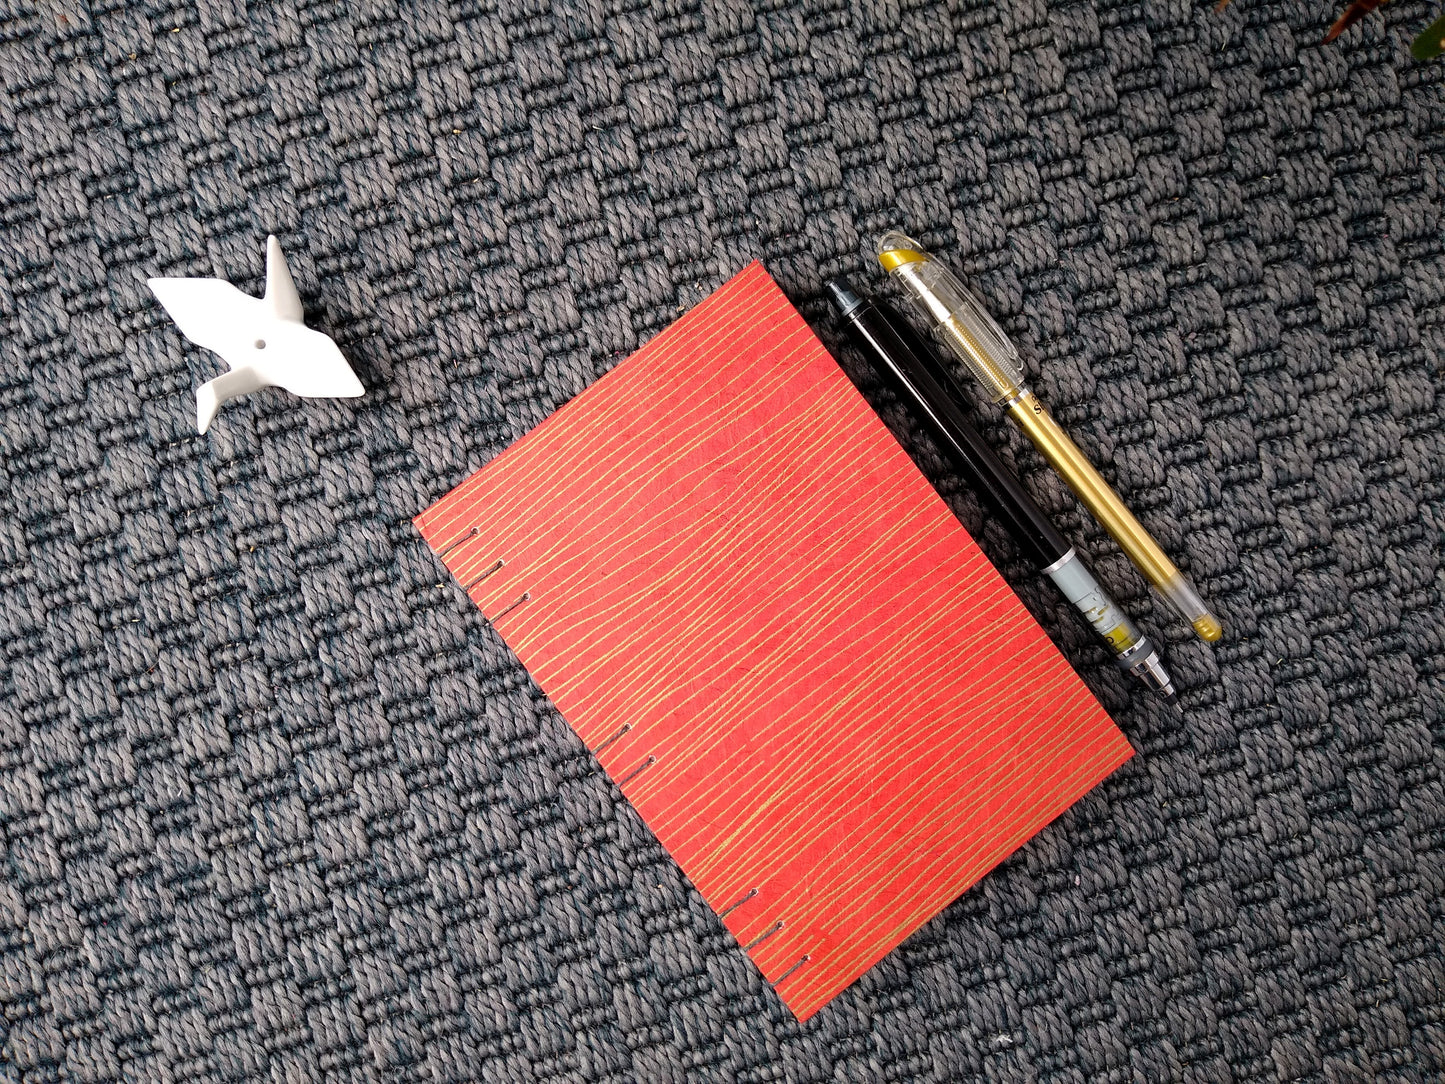 A handmade journal laying on a grey carpet beside a potted plant, a ceramic crane, a gold pen, and a black mechanical pencil. The cover of the journal is red with wavy horizontal gold lines.